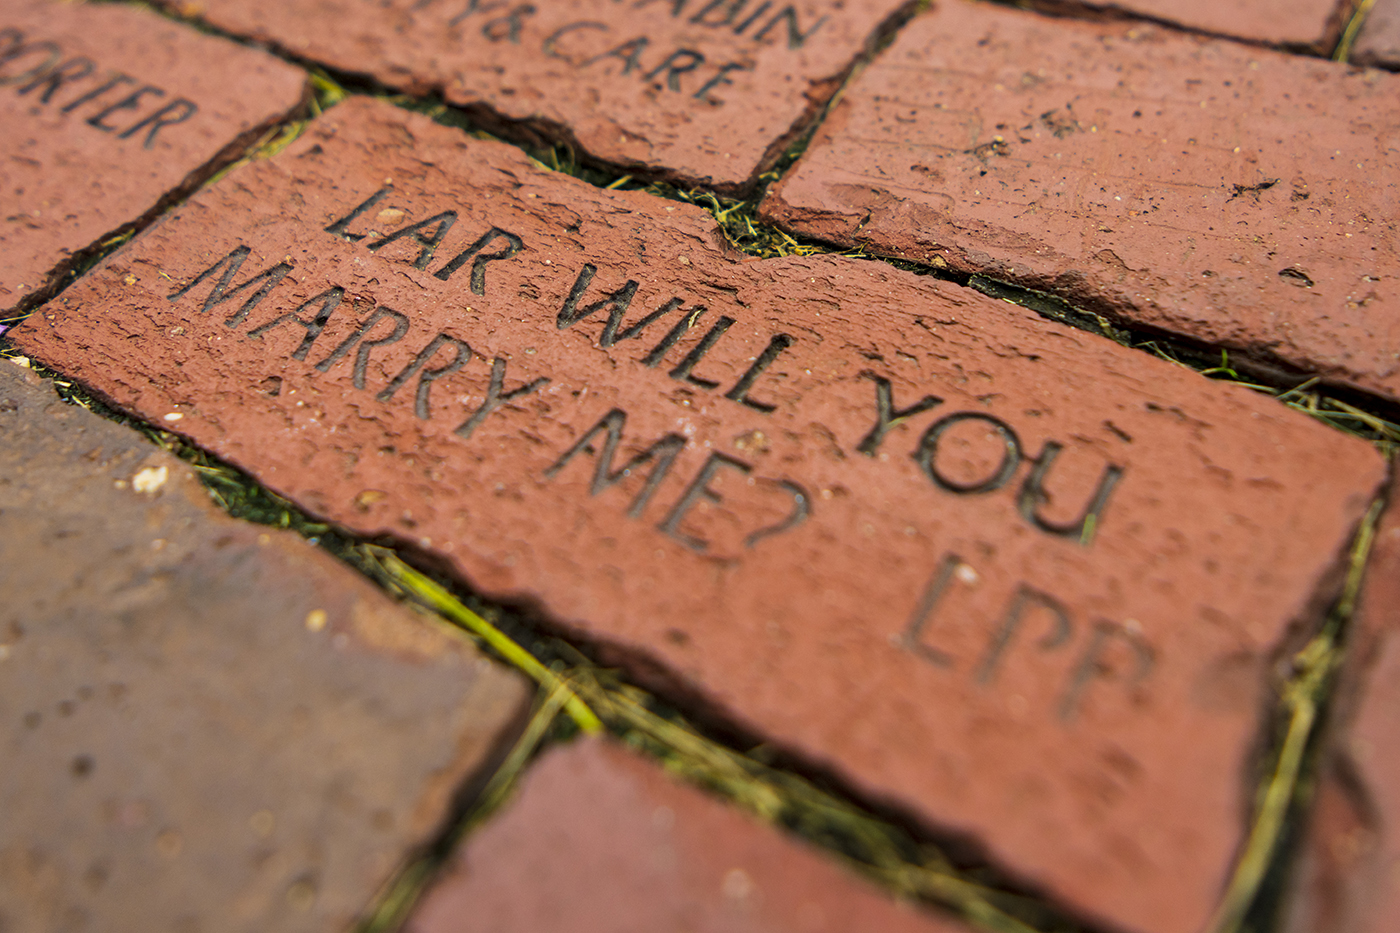 A red brick has black text carved on the top: "Lar, will you marry me? L.P.F." on Northeastern's Boston campus.